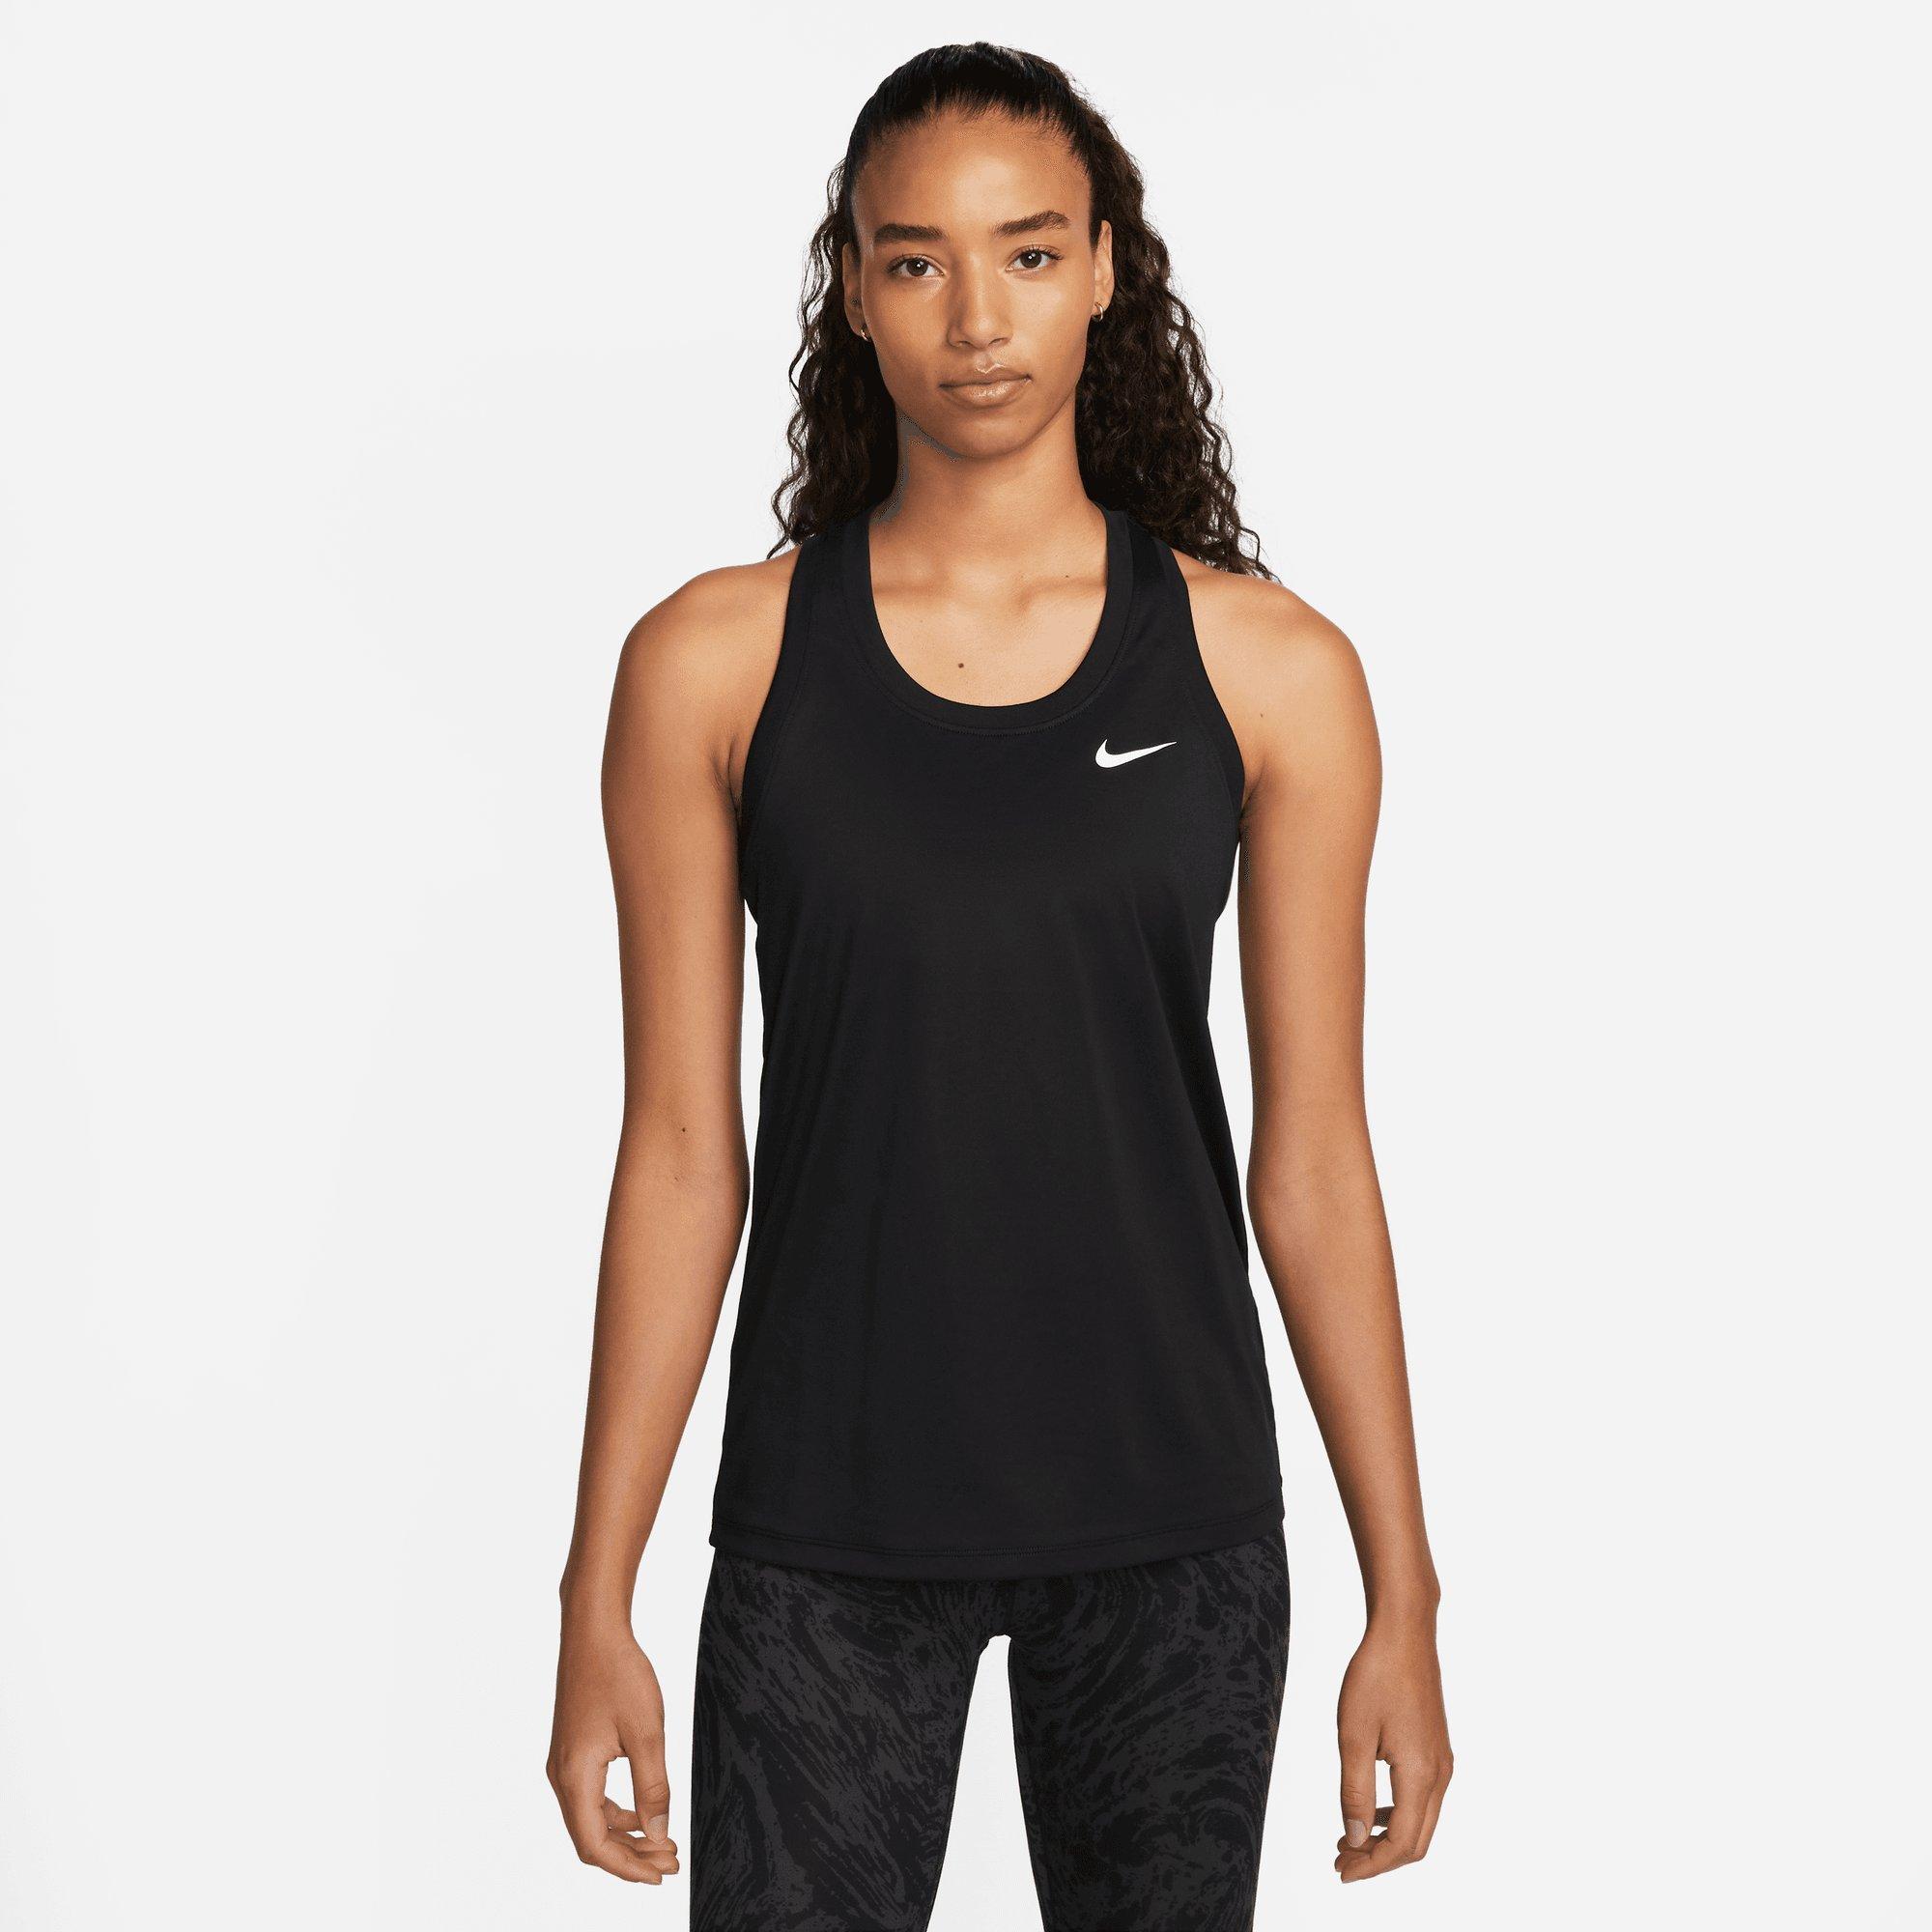 Women's Sports Apparel & Gear  Discover Your Active Style at Team Town  Sports